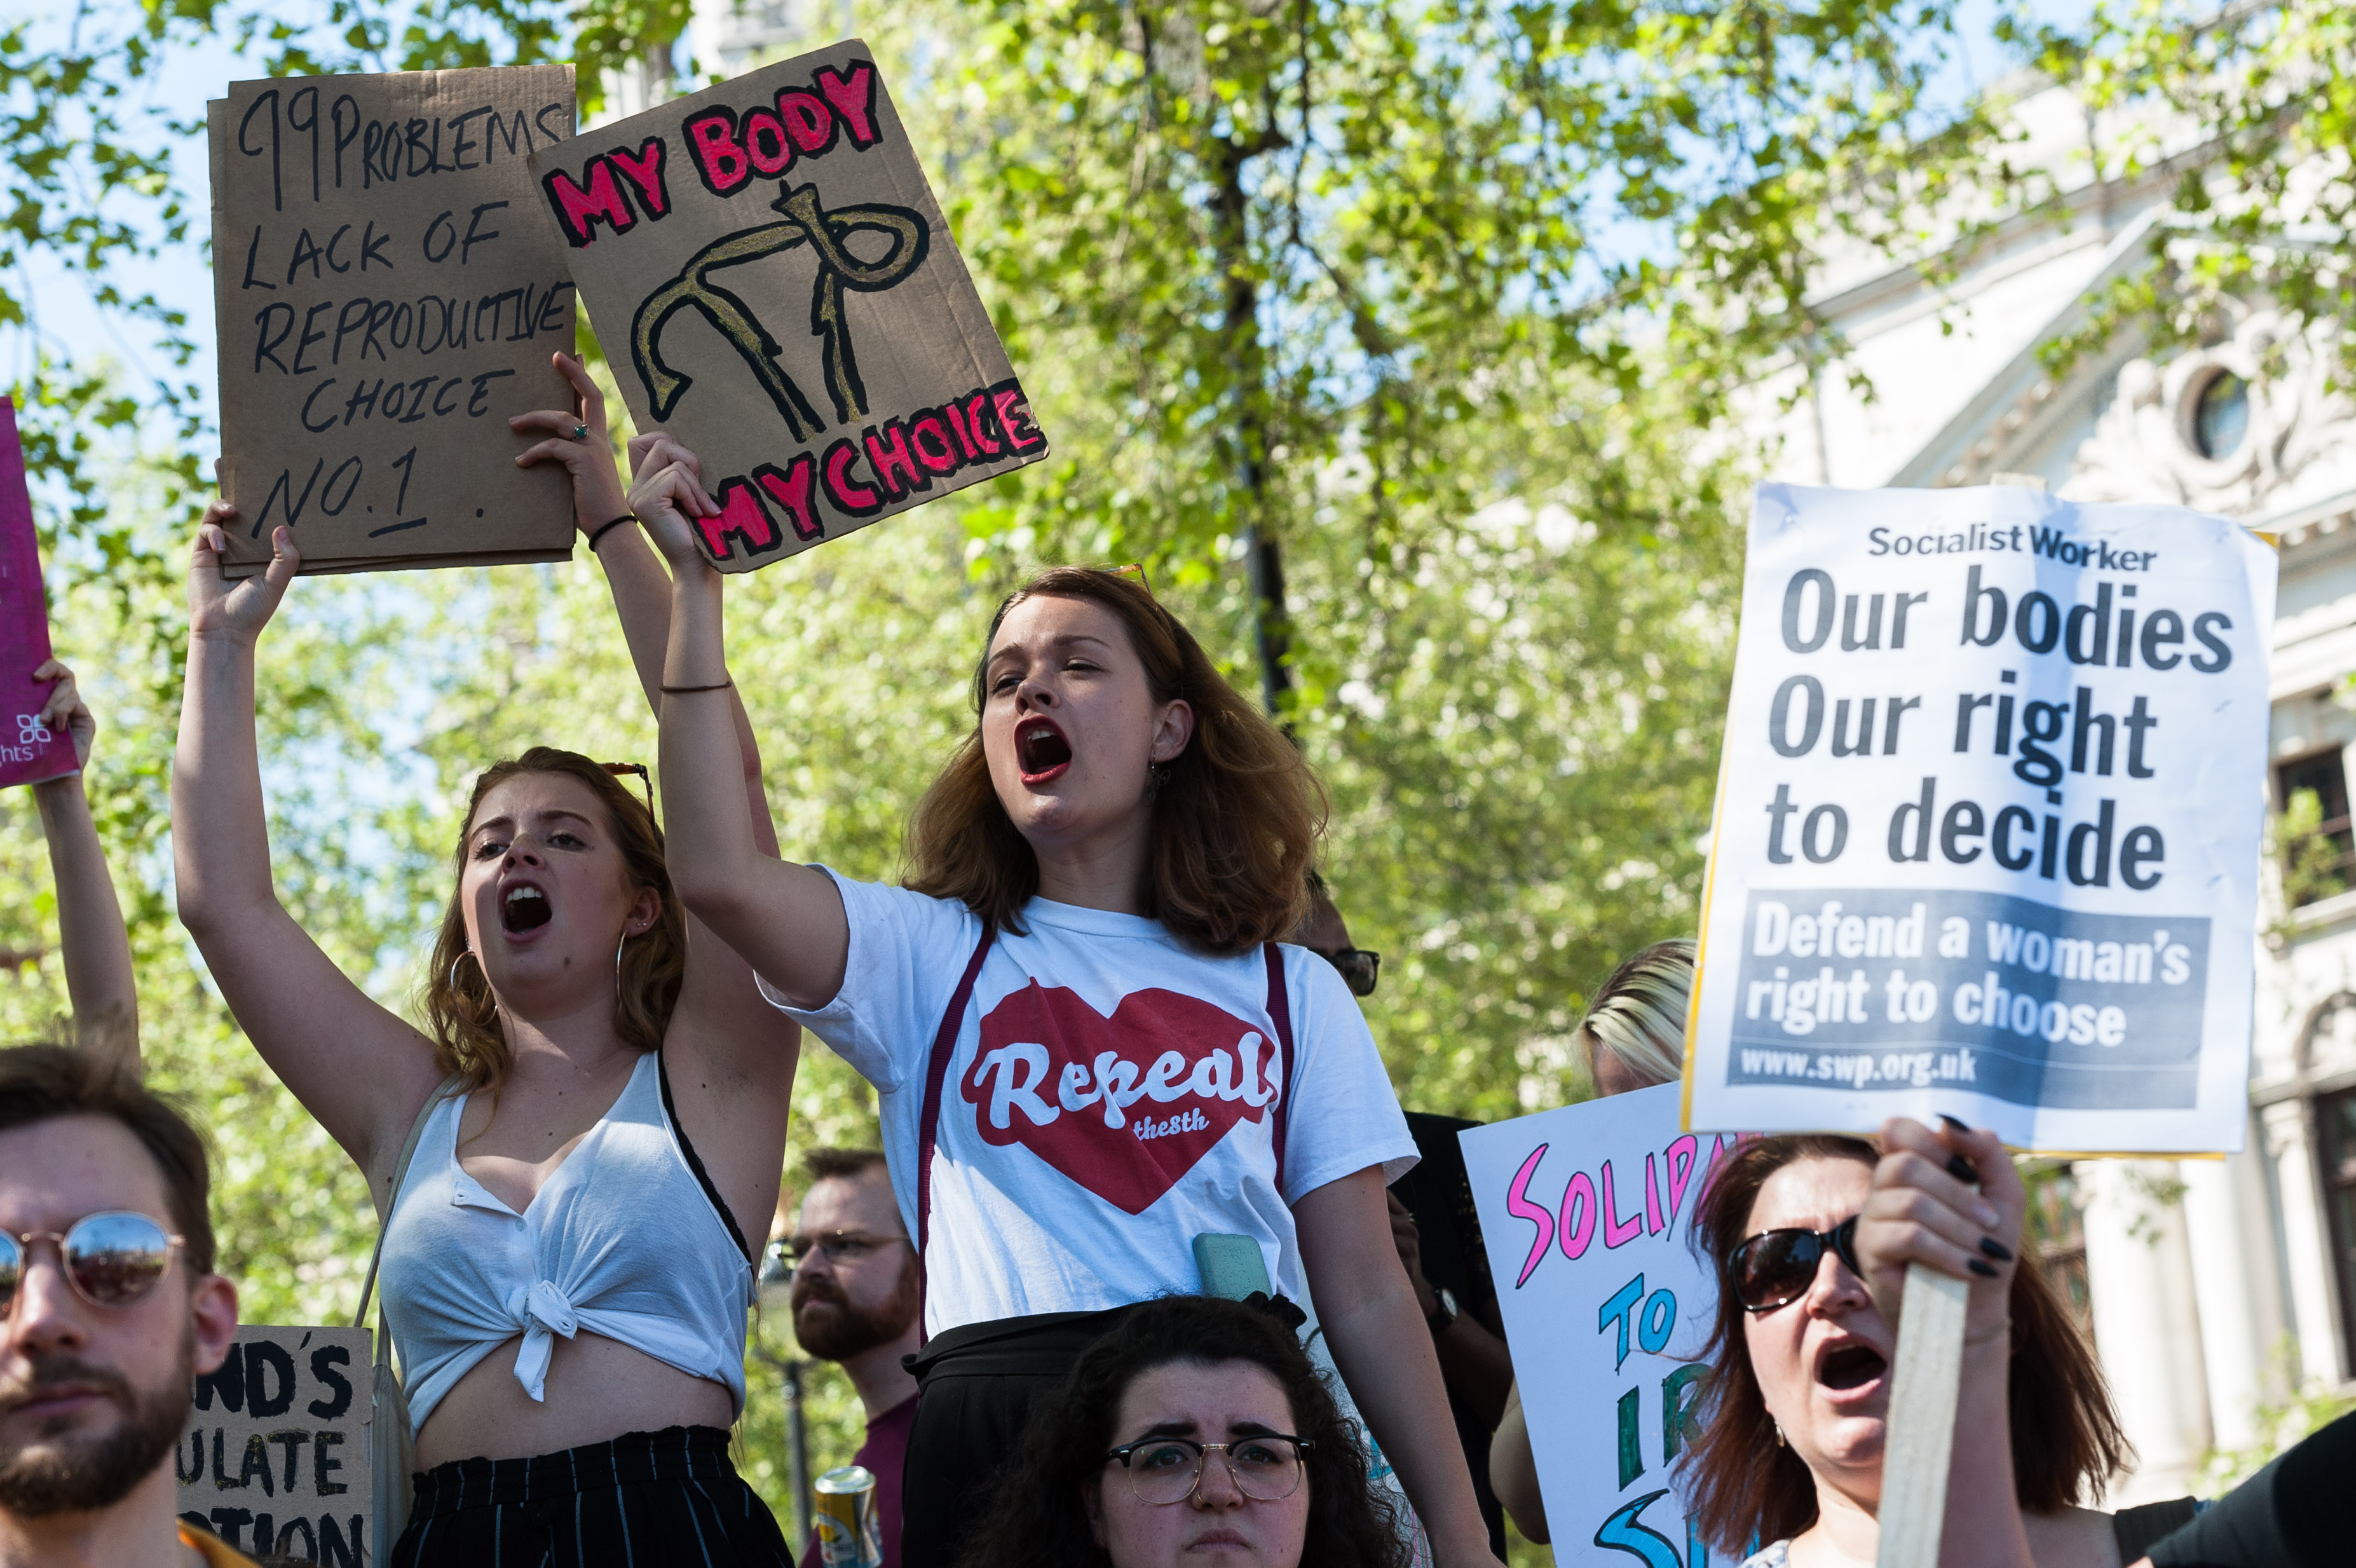 'March For Choice' in London